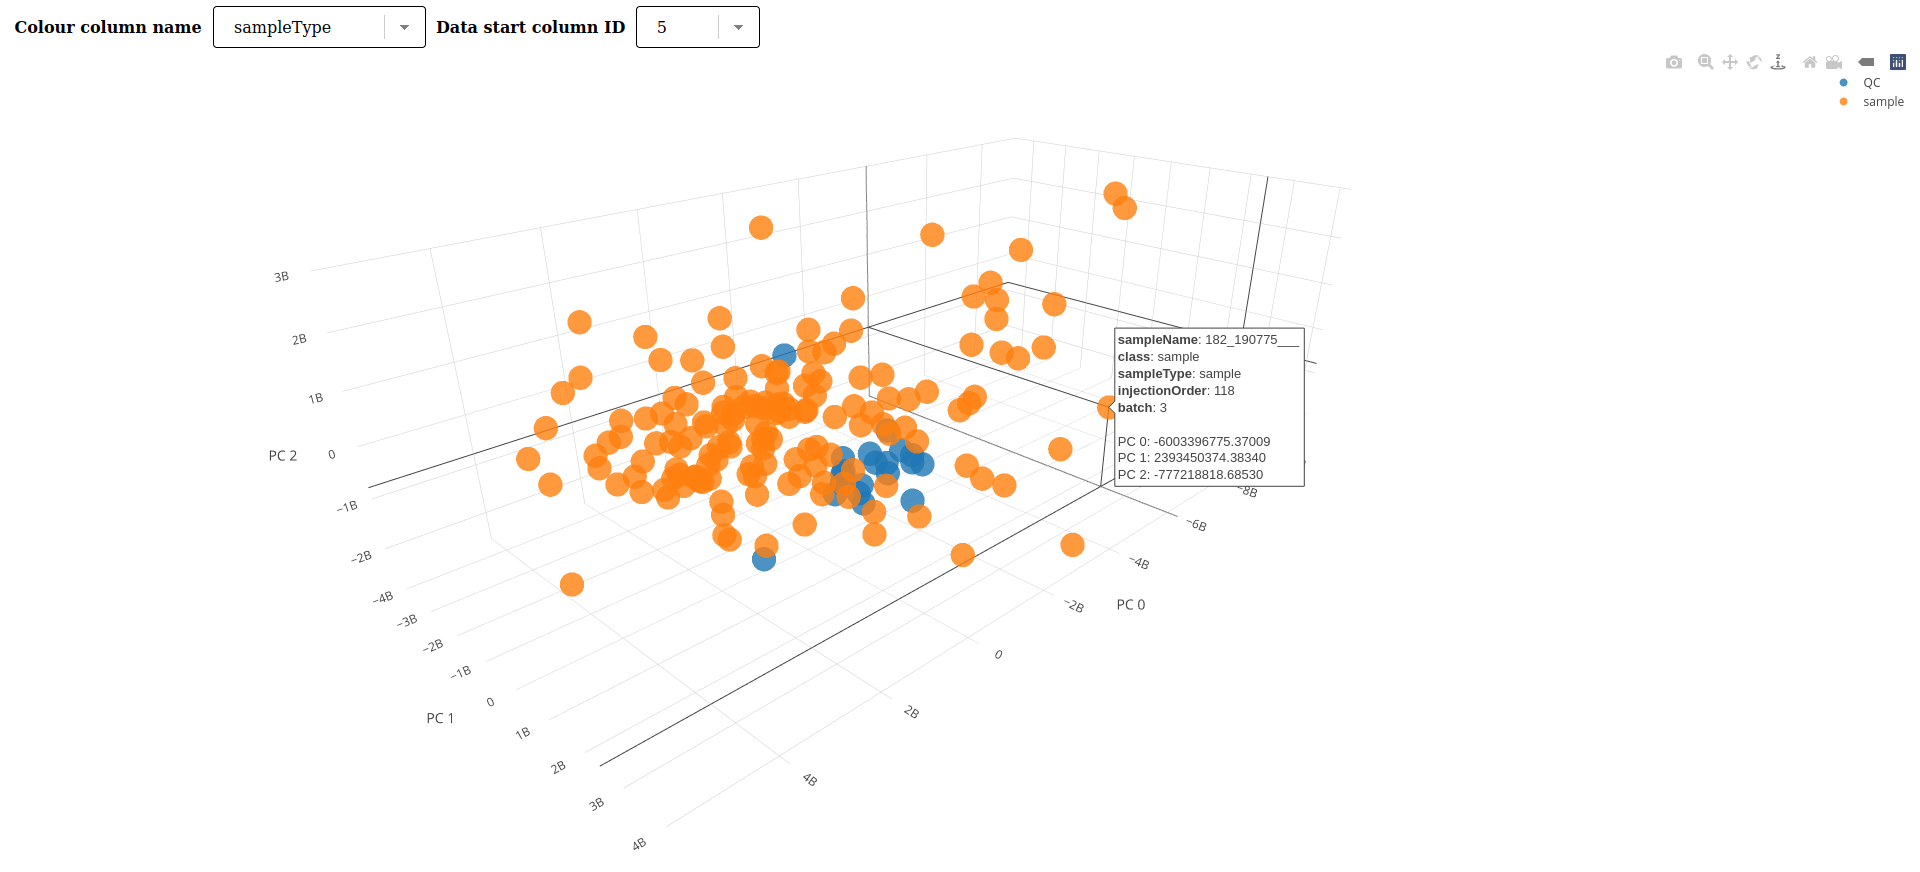 Screenshot of the new 3 dimensional PCA plot visualisation available in Galaxy.